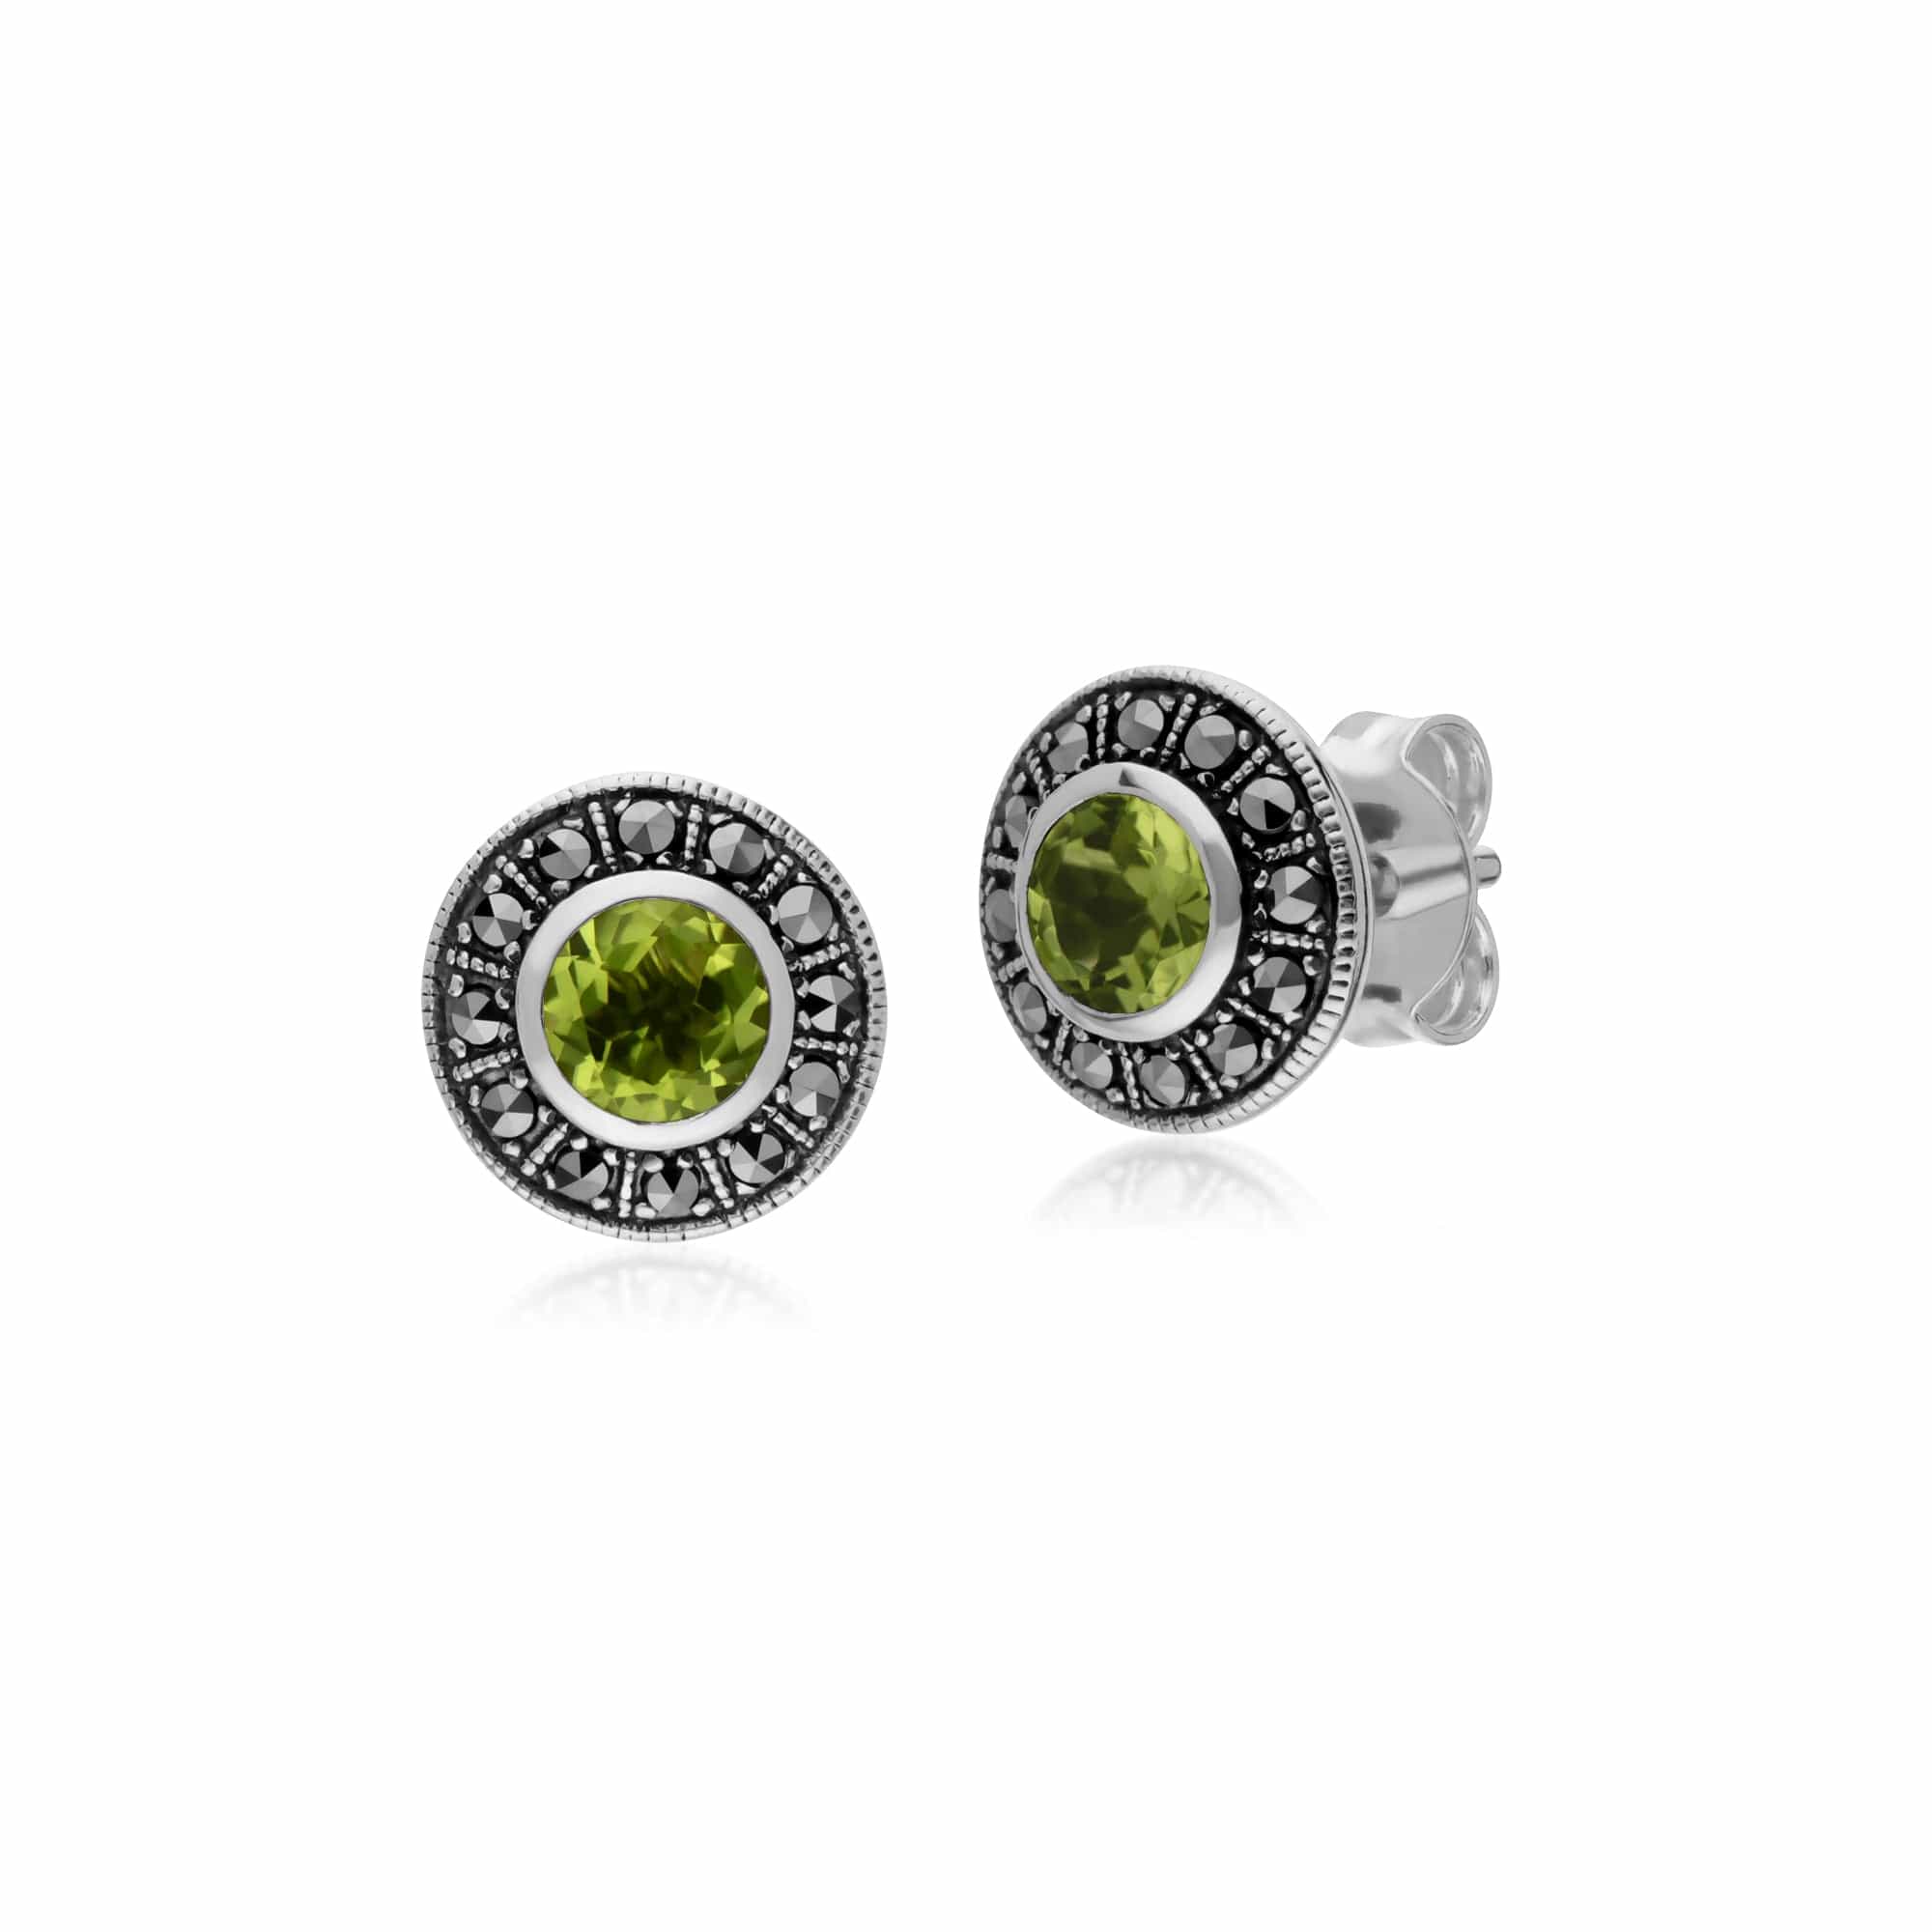 214E872704925-214N707304925 Art Deco Style Round Peridot and Marcasite Cluster Stud Earrings & Pendant Set in 925 Sterling Silver 2